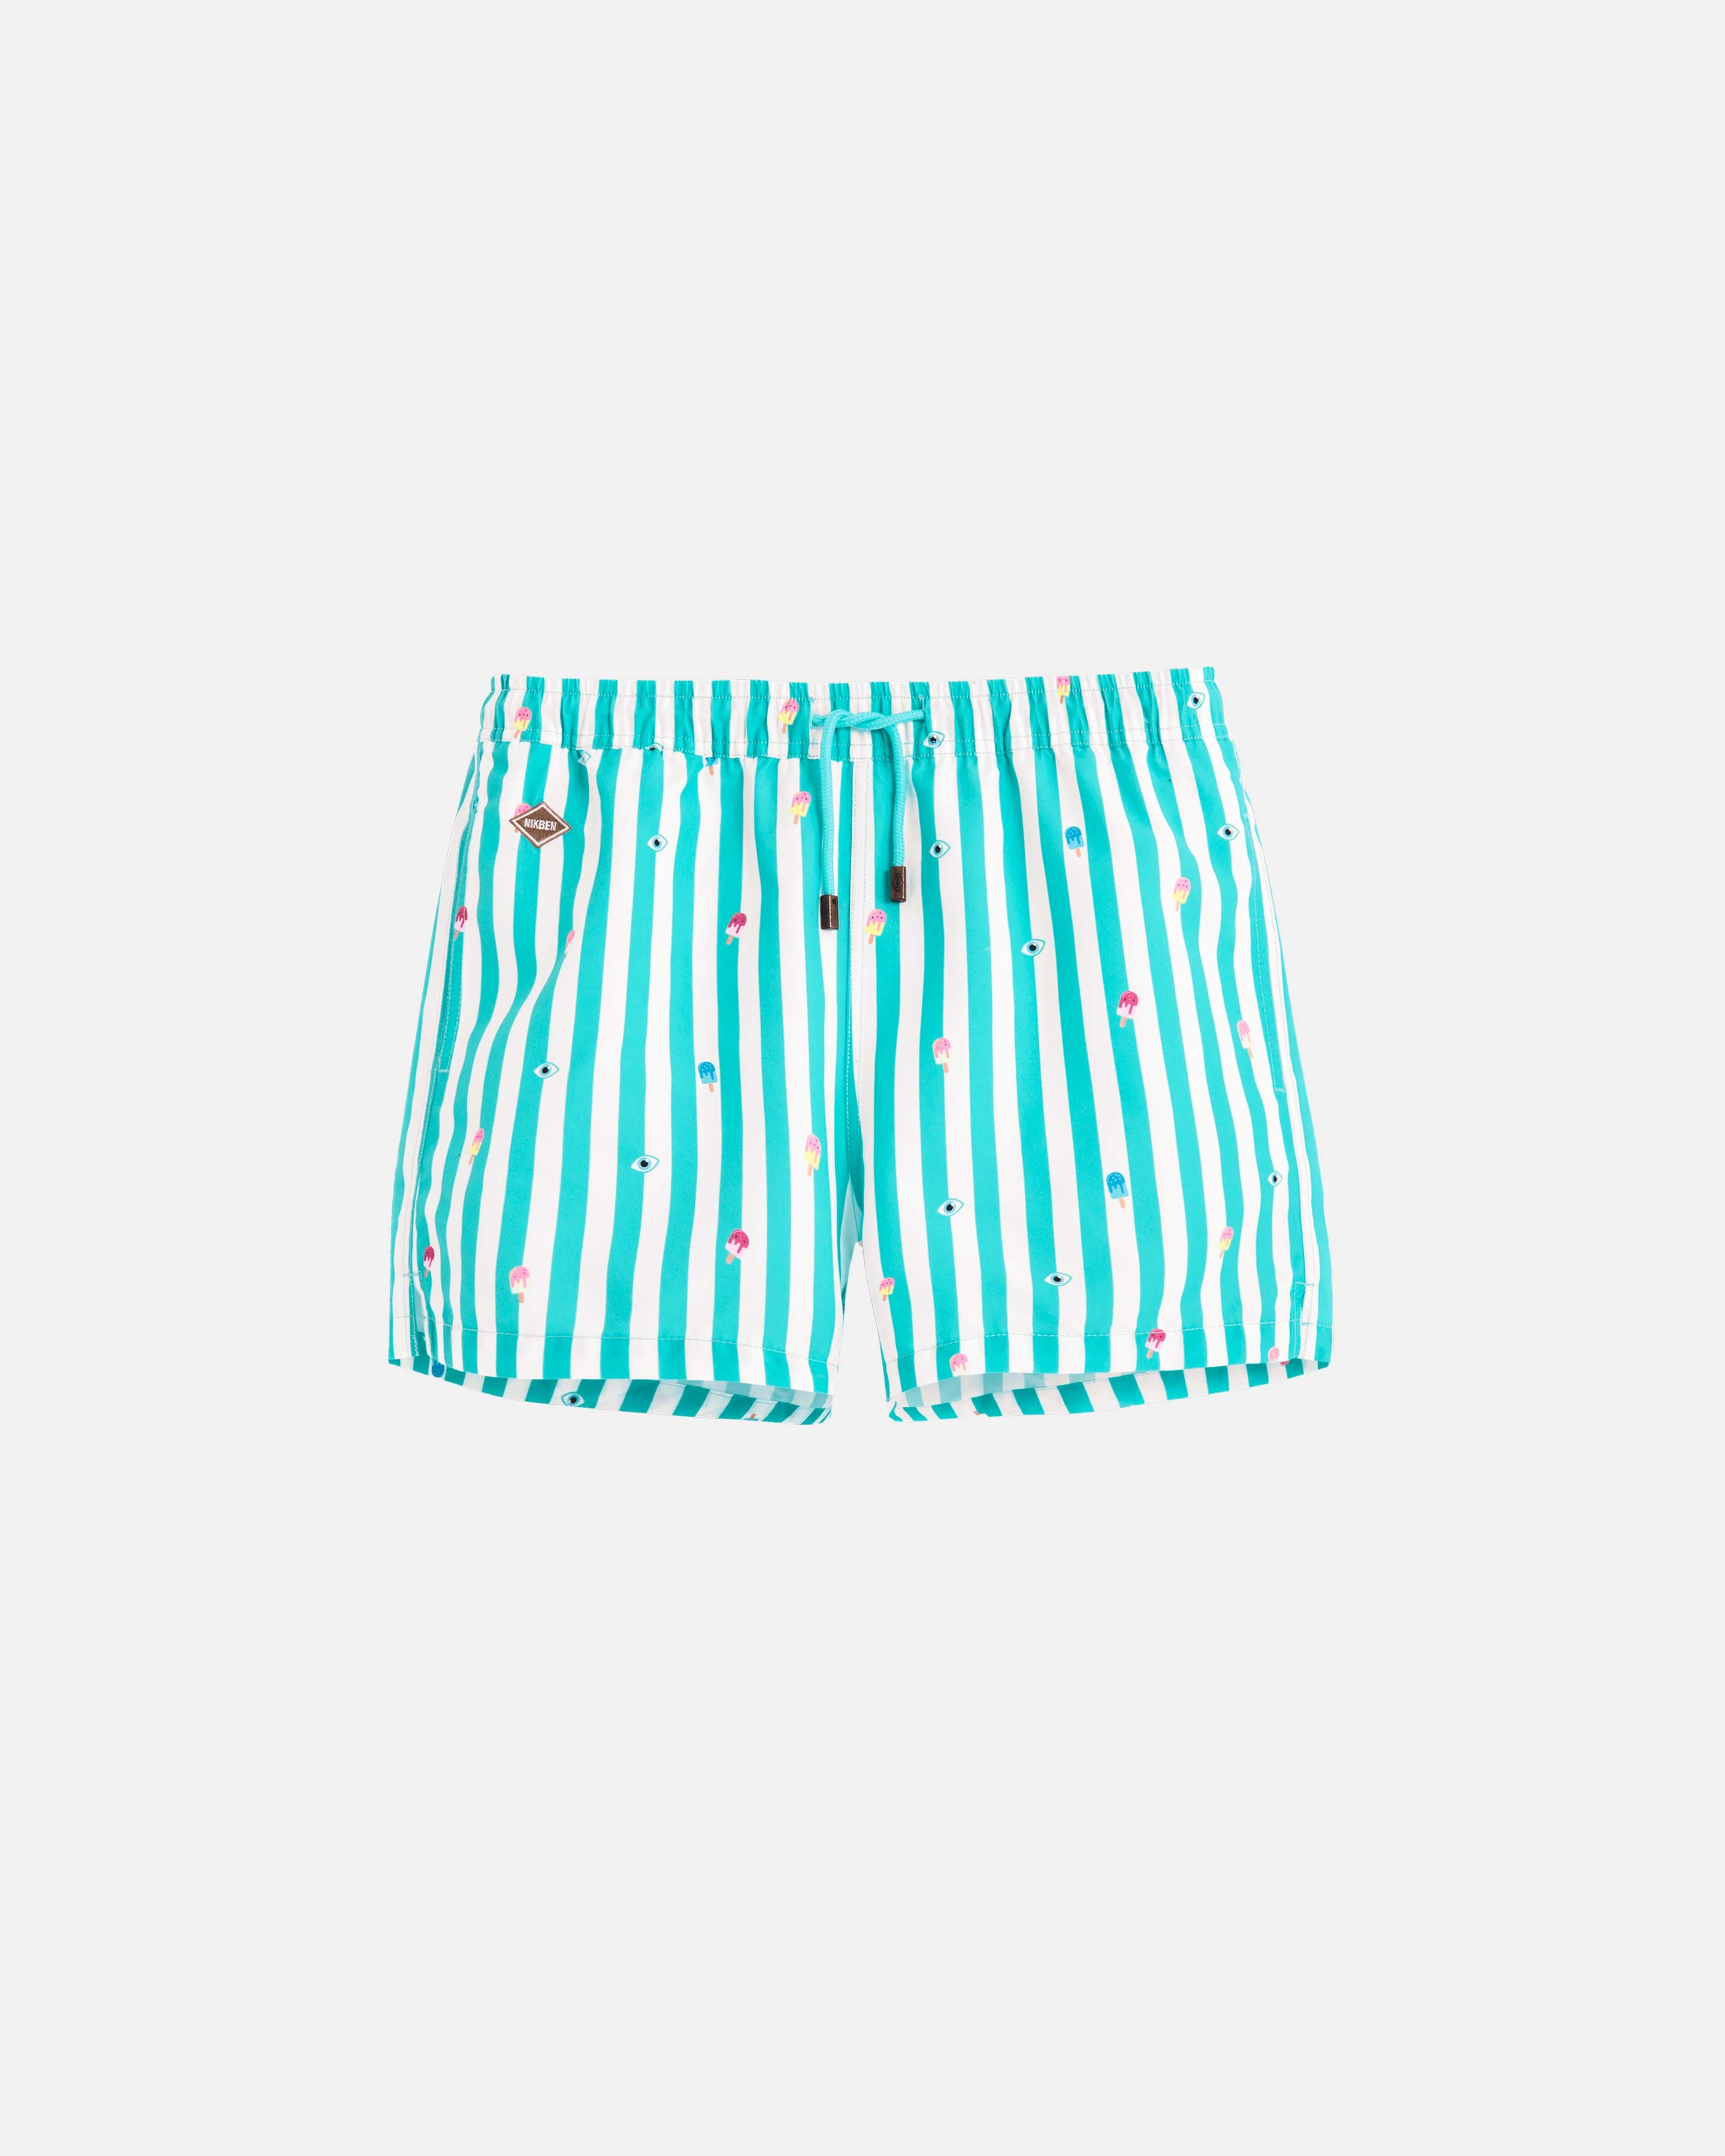 White-green striped swim trunks. Mid length shorts with drawstring waistband and two side pockets.